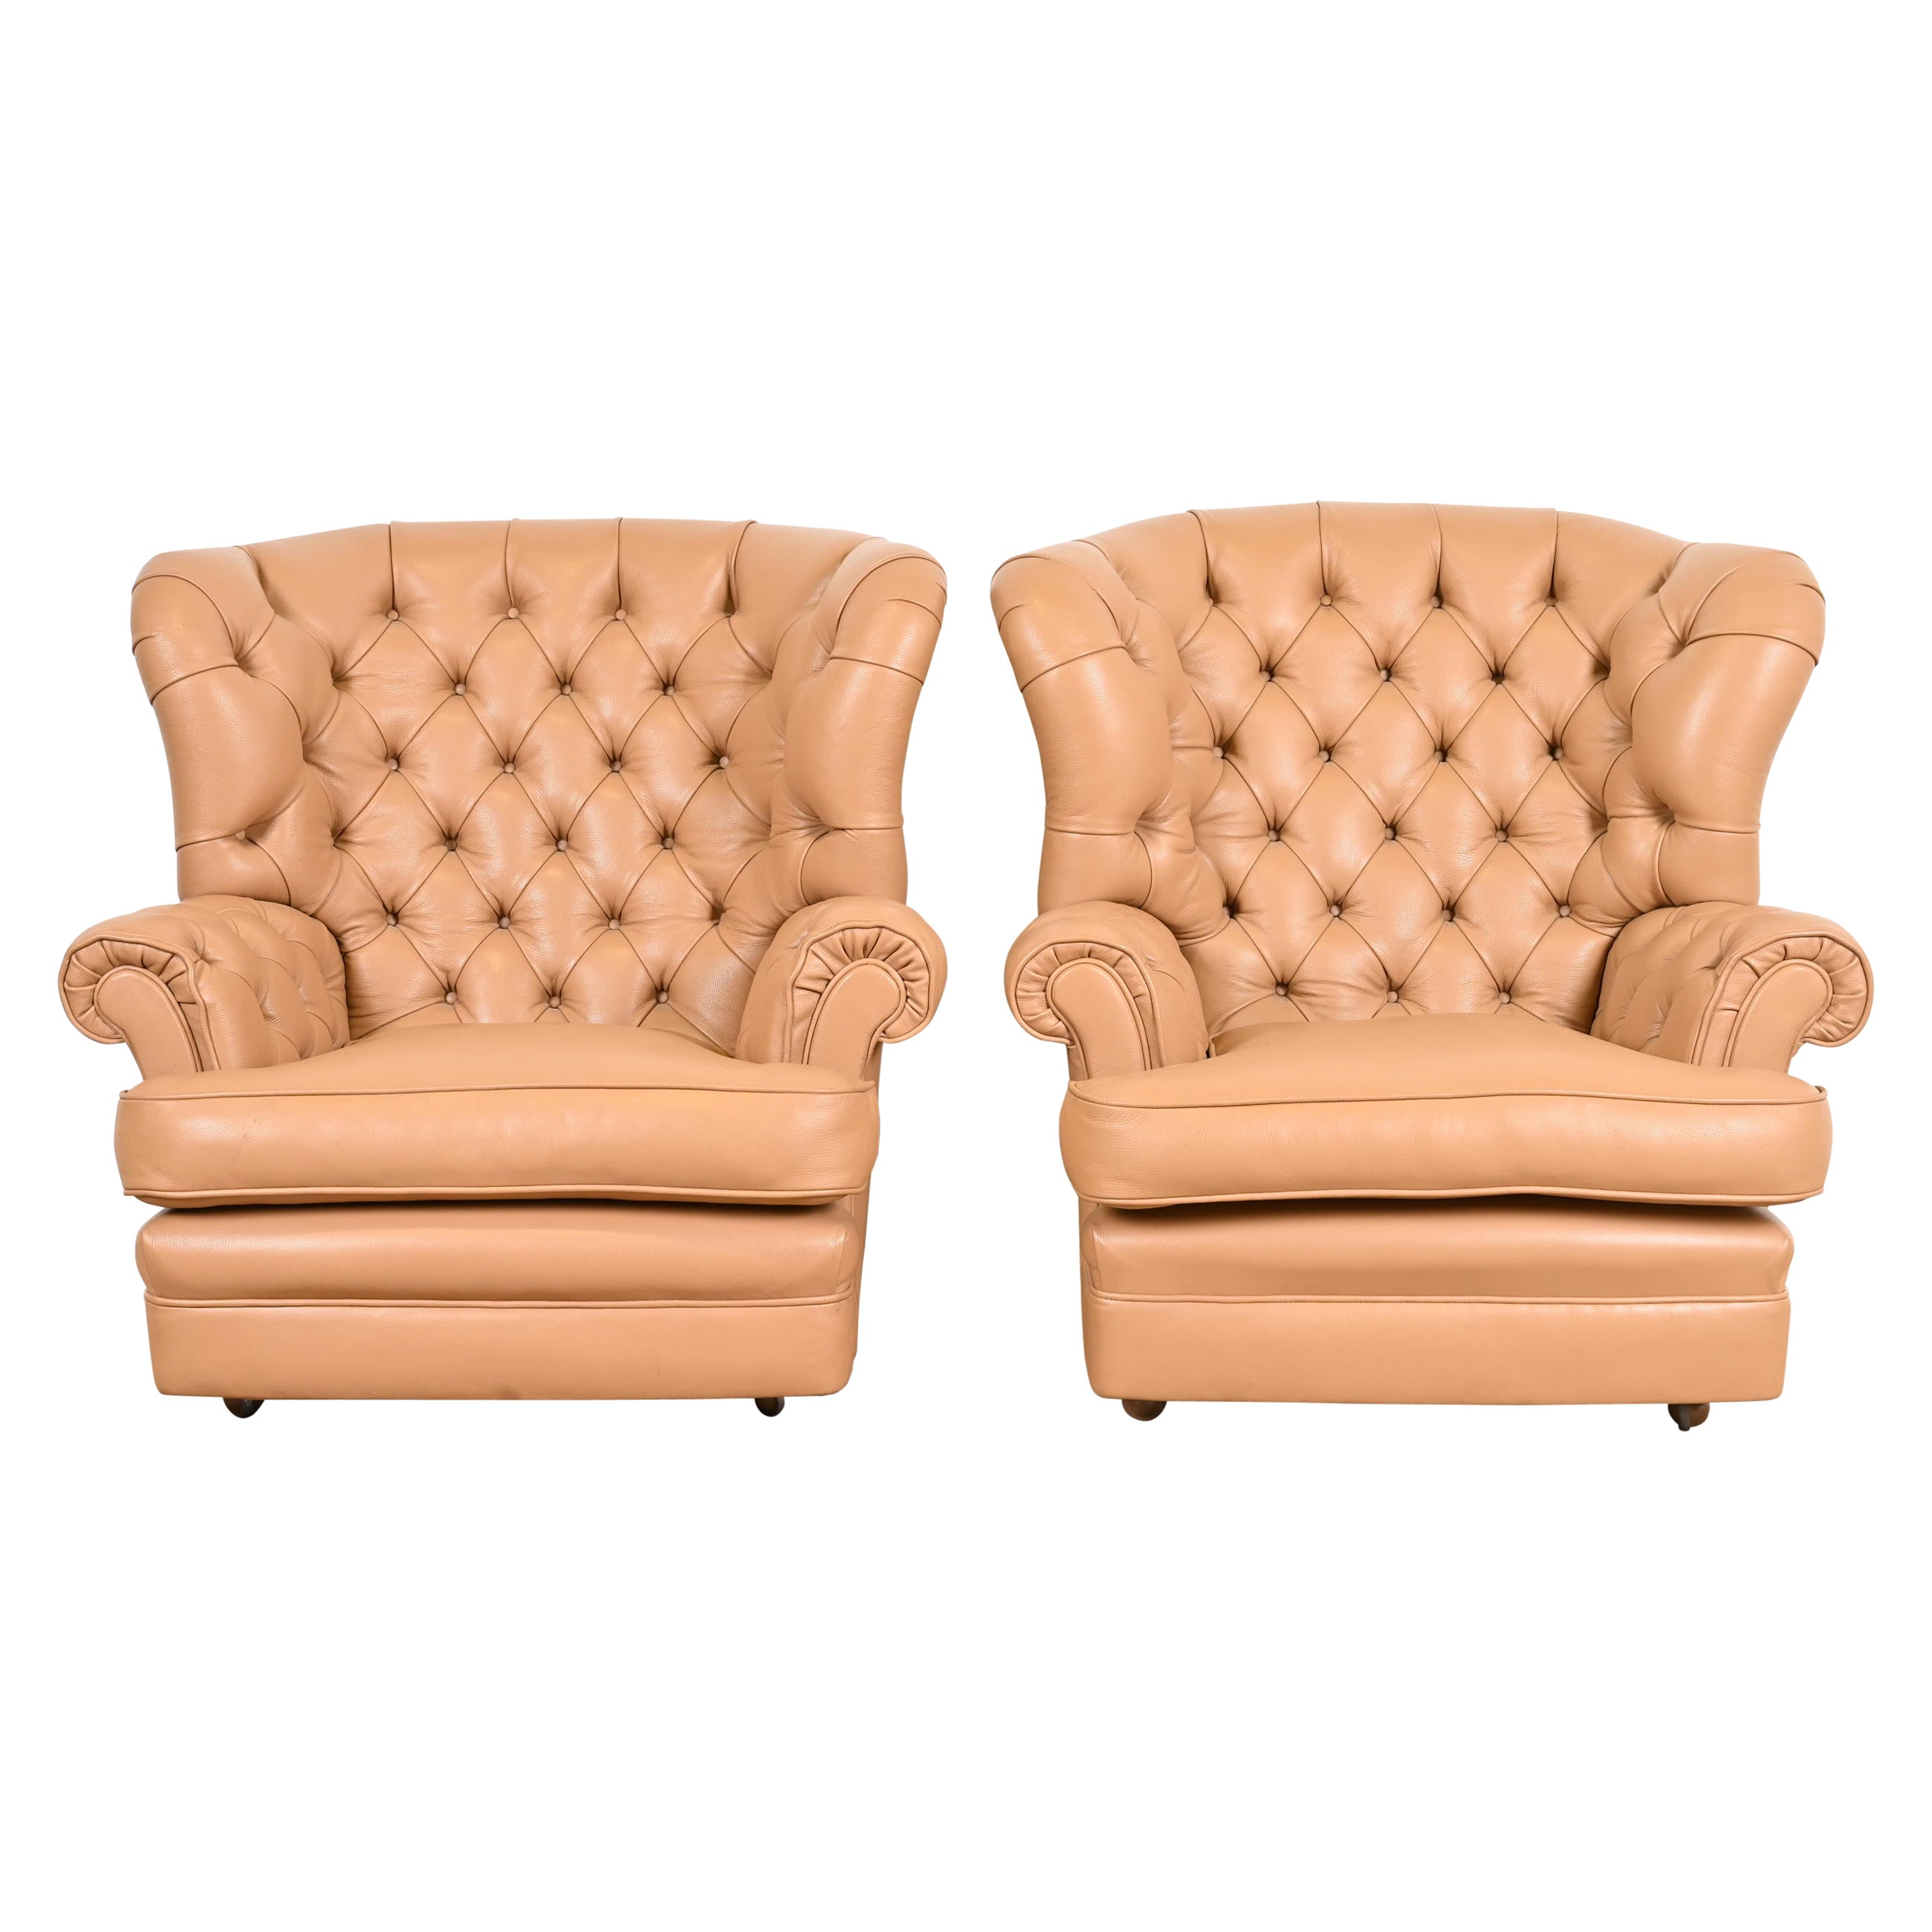 Vintage Tufted Leather Chesterfield Wingback Lounge Chairs, Pair For Sale